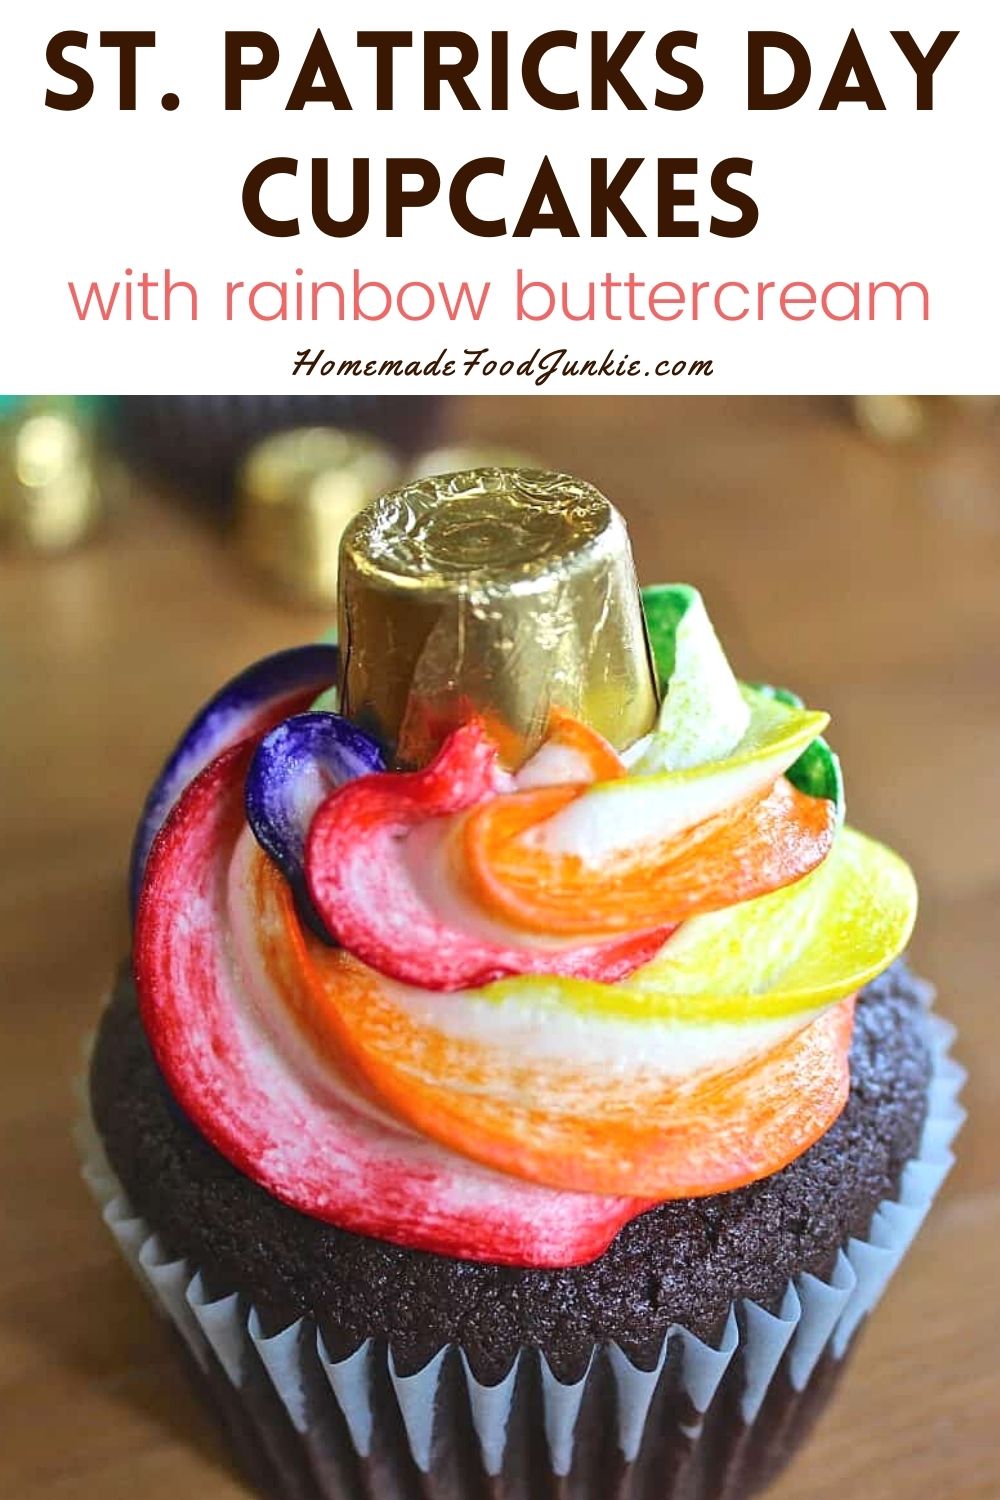 St. Patricks Day Cupcakes With Rainbow Buttercream-Pin Image